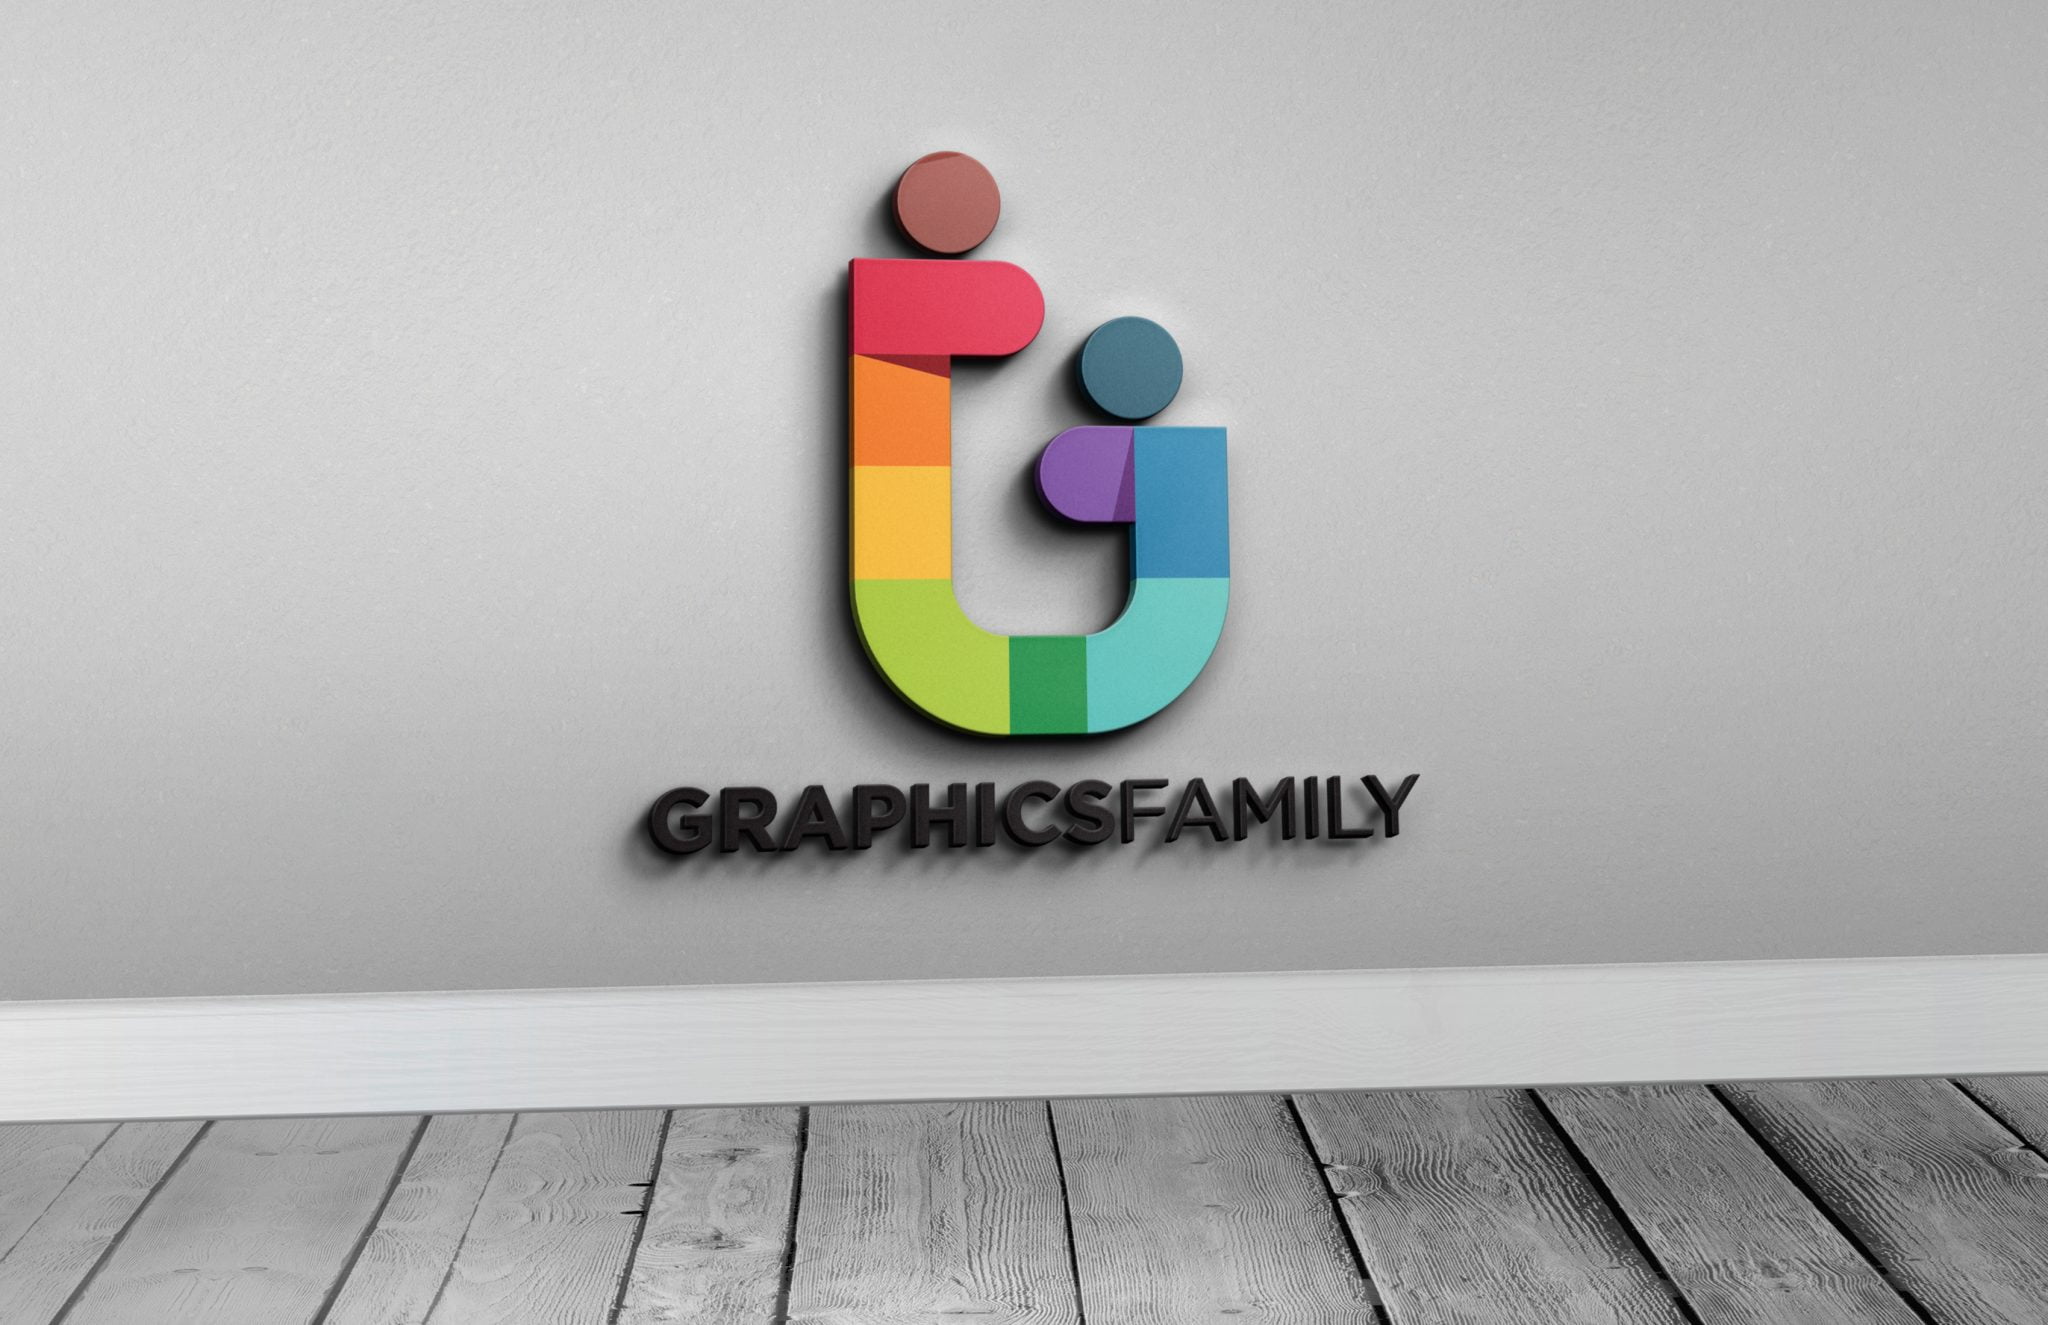 Download 3D Free Photoshop Logo Mockup - GraphicsFamily